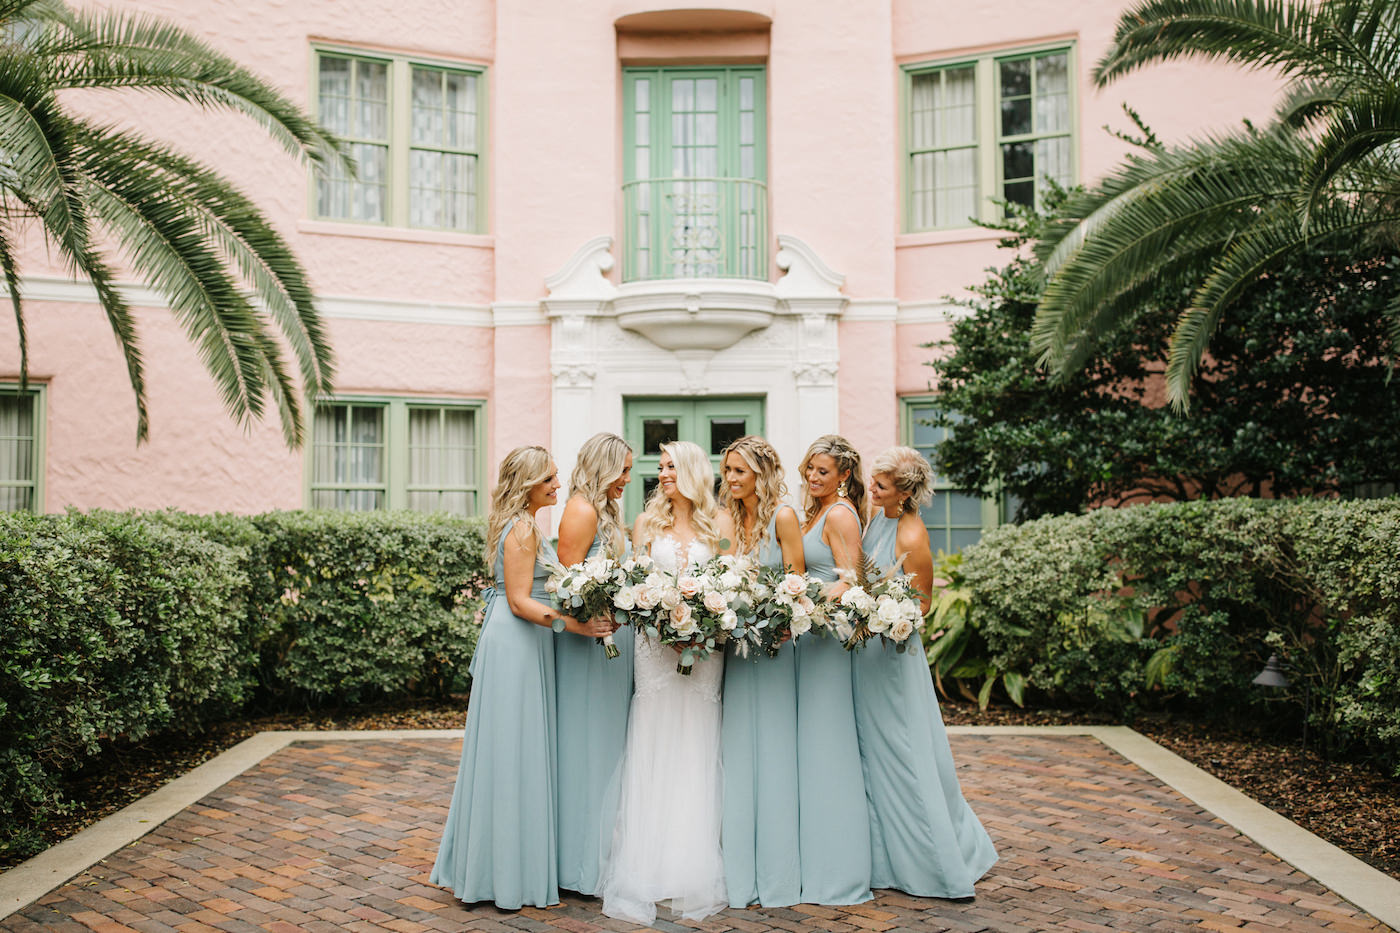 Boho Chic Inspired Bride and Bridesmaids in Long Mix and Match Show Me Your Mumu in Silver Sage, Ashley Stegbauer Morrison Wearing Romantic Ines Di Santo Lace Wedding Dress, Holding Lush Ivory and Blush Pink Floral Bouquets with Greenery | Tea Garden at Vinoy Renaissance Resort in Downtown St. Petersburg | Luxury Florida Wedding and Bridal Dress Shop Isabel O’Neil Bridal Collection | Downtown St. Pete Wedding Planner Parties A’ La Carte